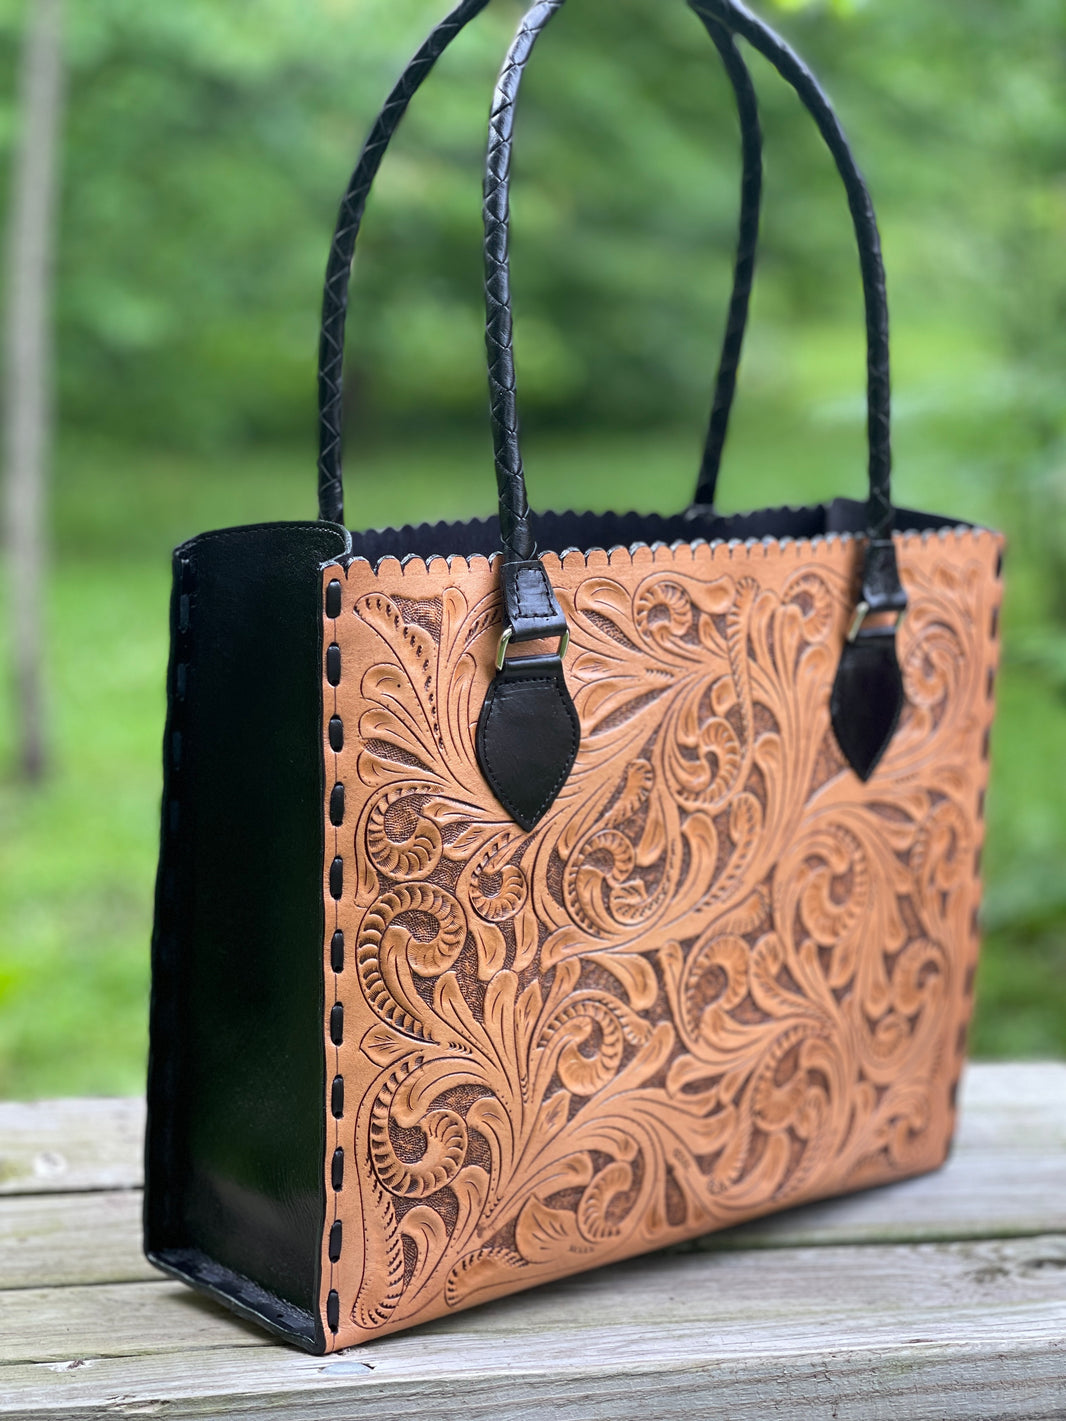 ALLE Best Hand-tooled leather handbags - Unique Designs - $30 Off Now!